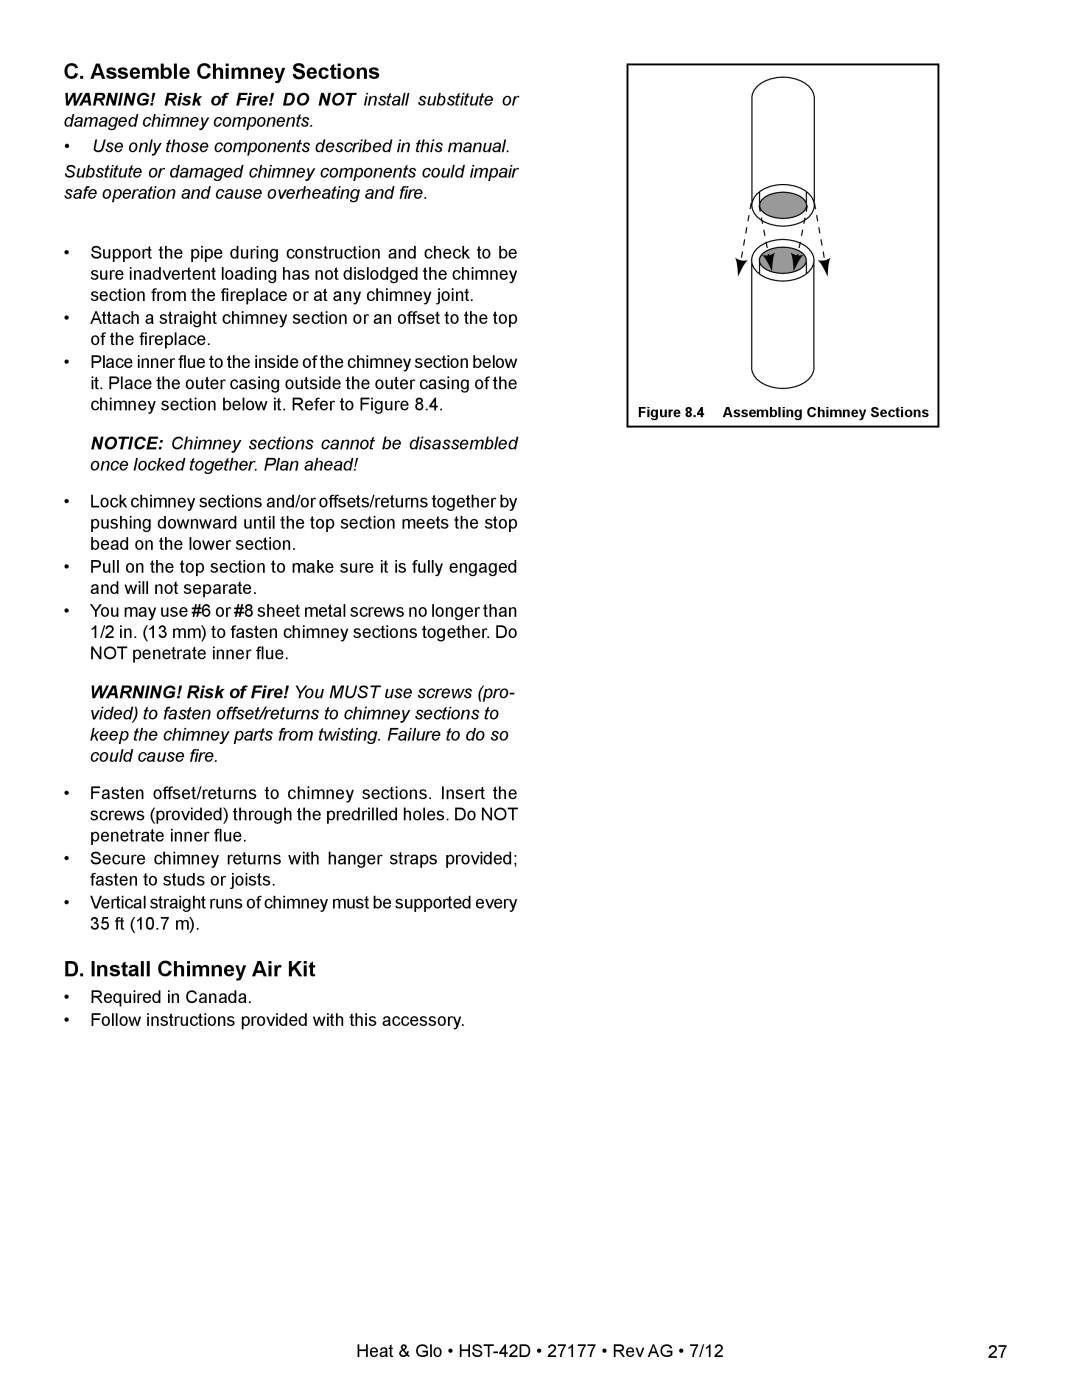 Heat & Glo LifeStyle HST-42D owner manual C. Assemble Chimney Sections, D. Install Chimney Air Kit 